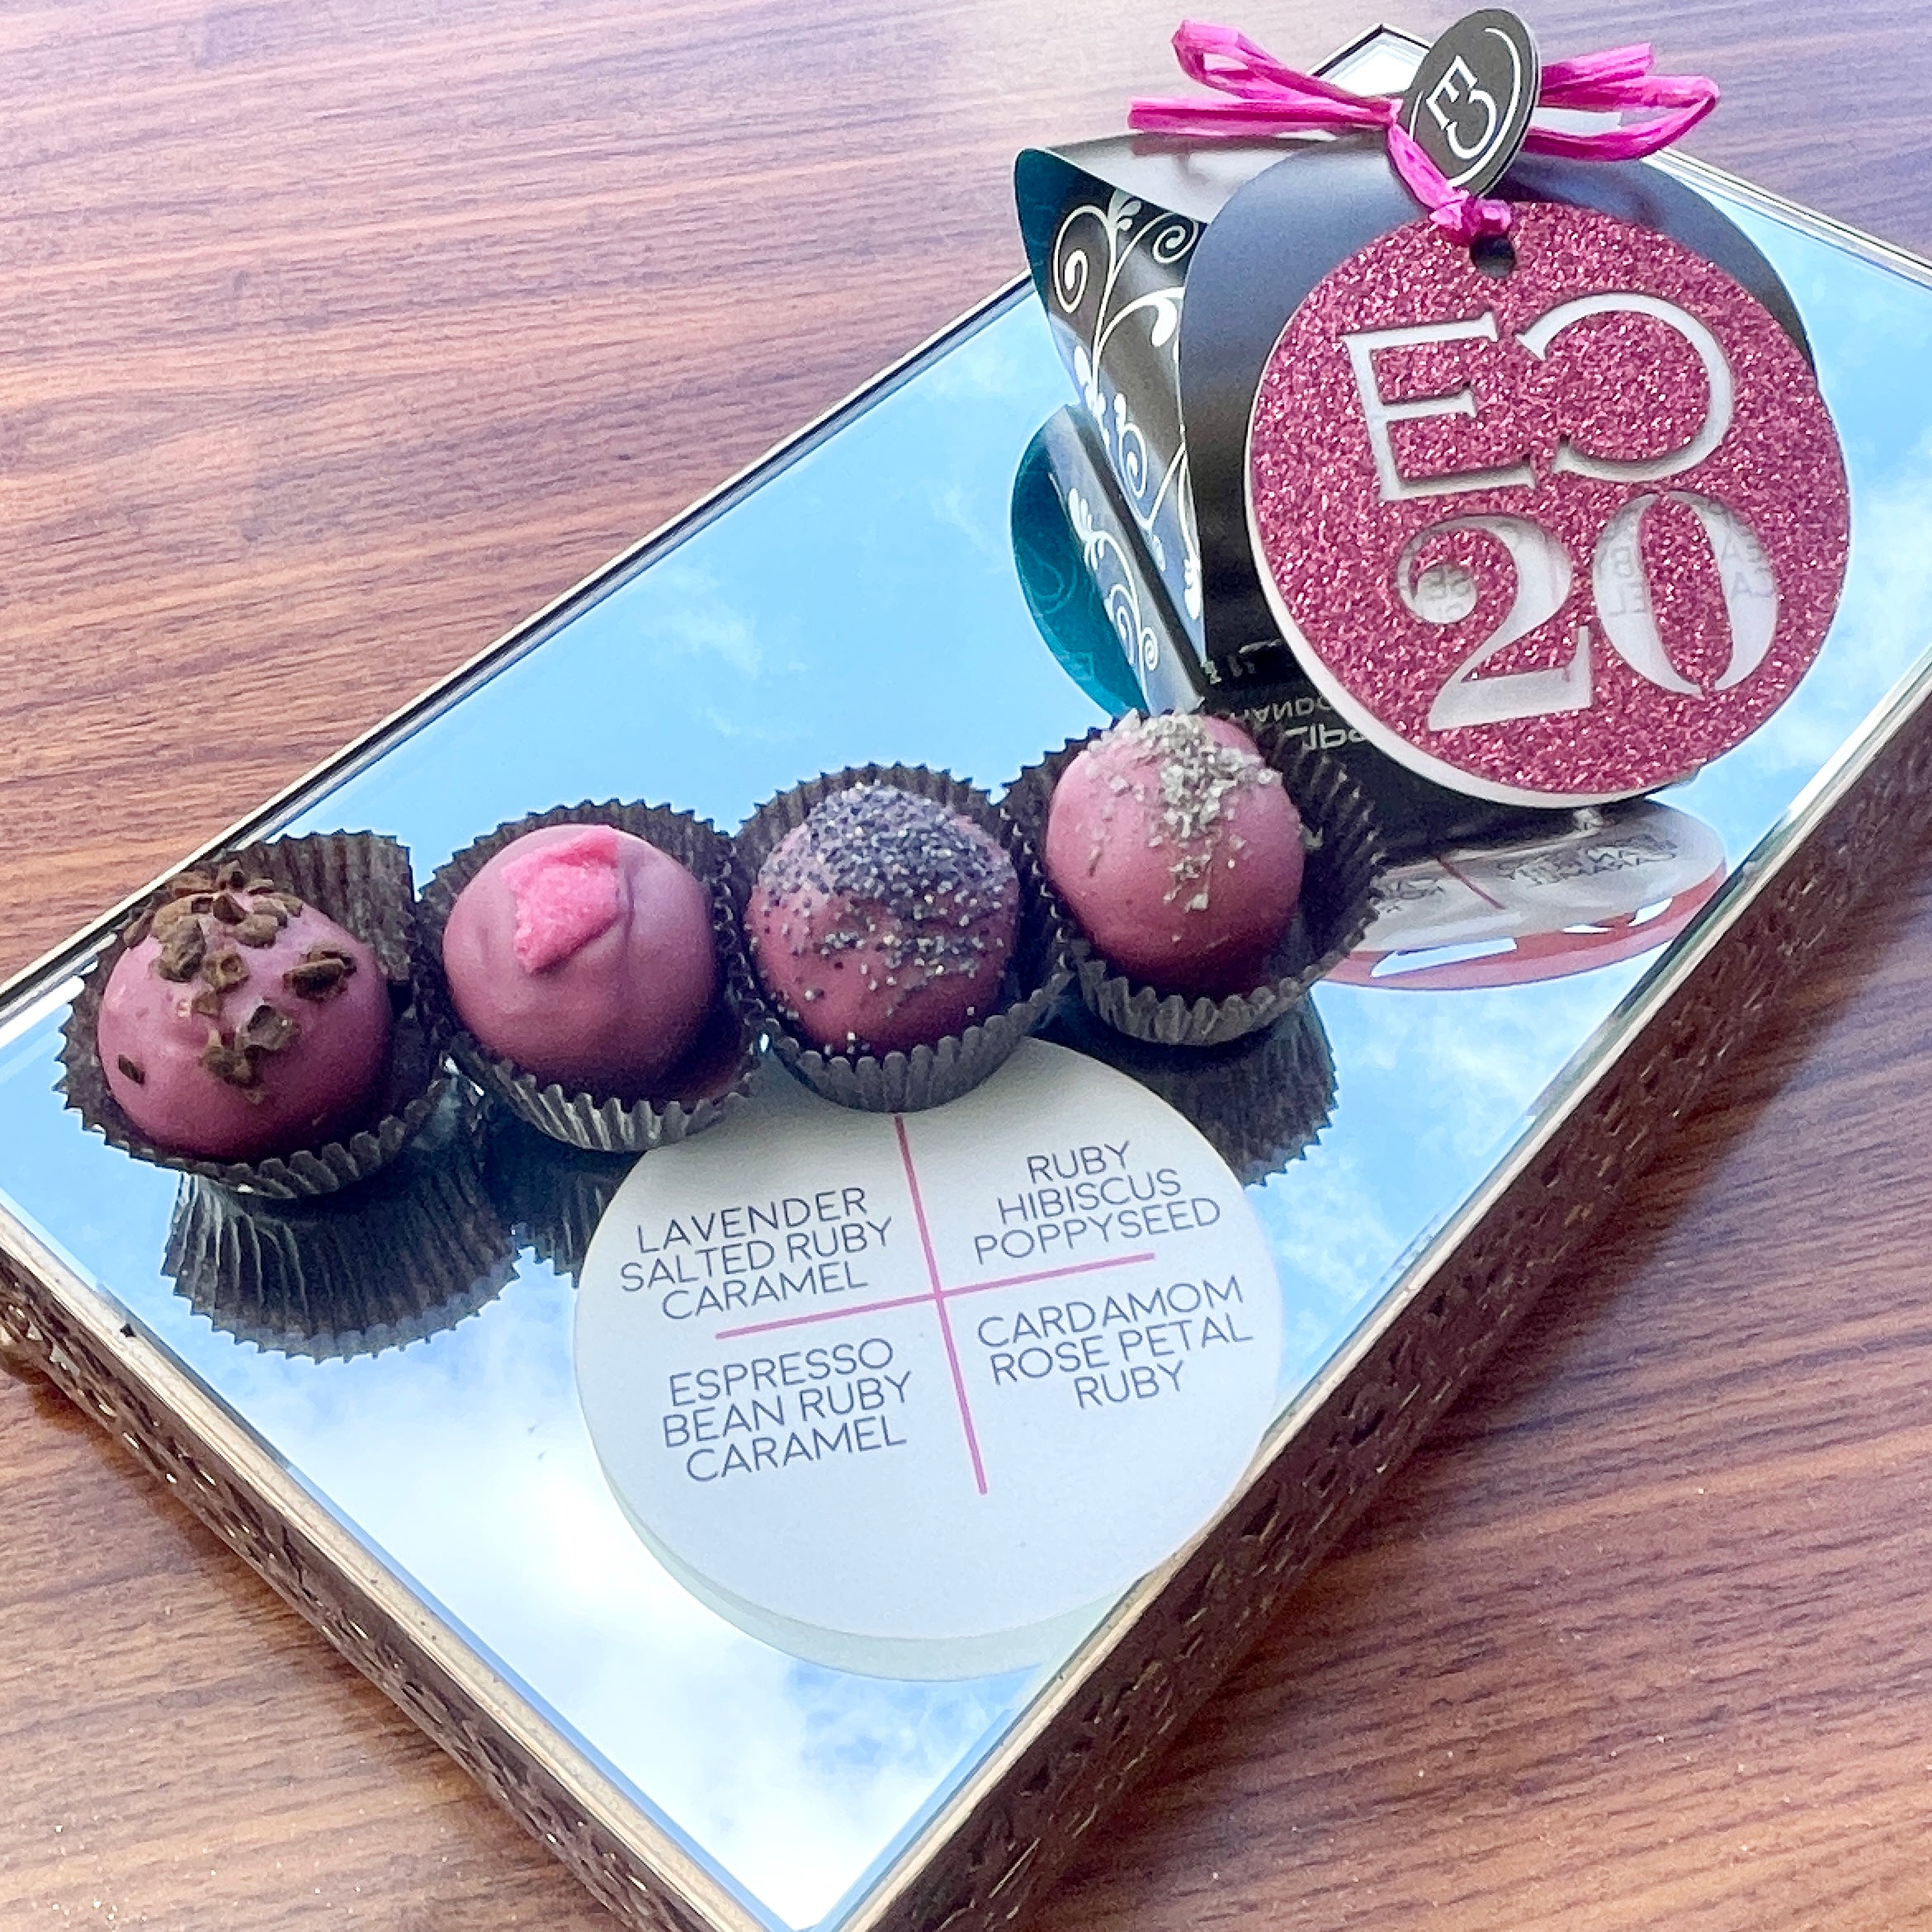 20th Anniversary Ruby Chocolate Truffle Collection-Chocolate-Eclipse Chocolate